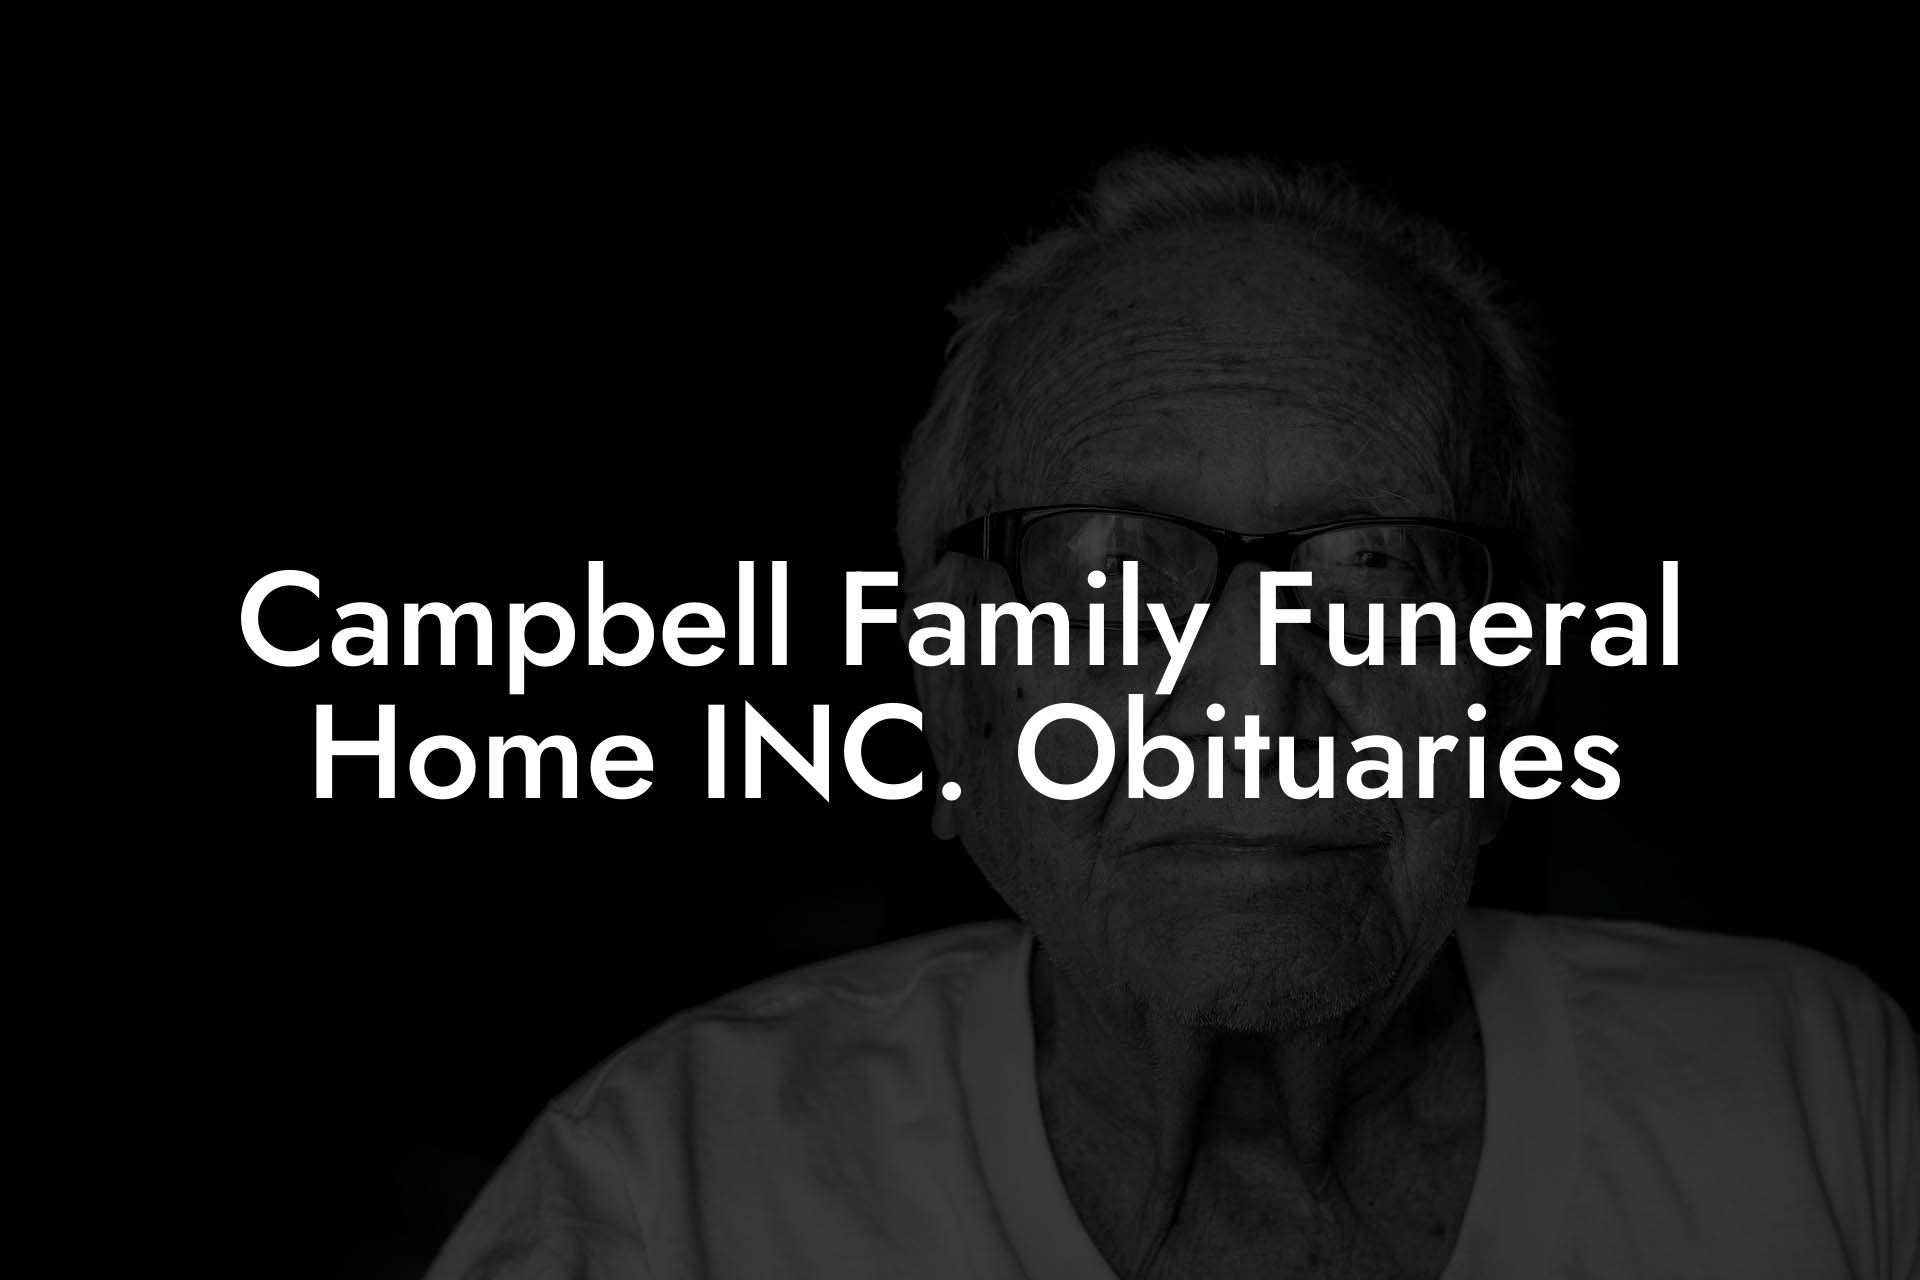 Campbell Family Funeral Home INC. Obituaries